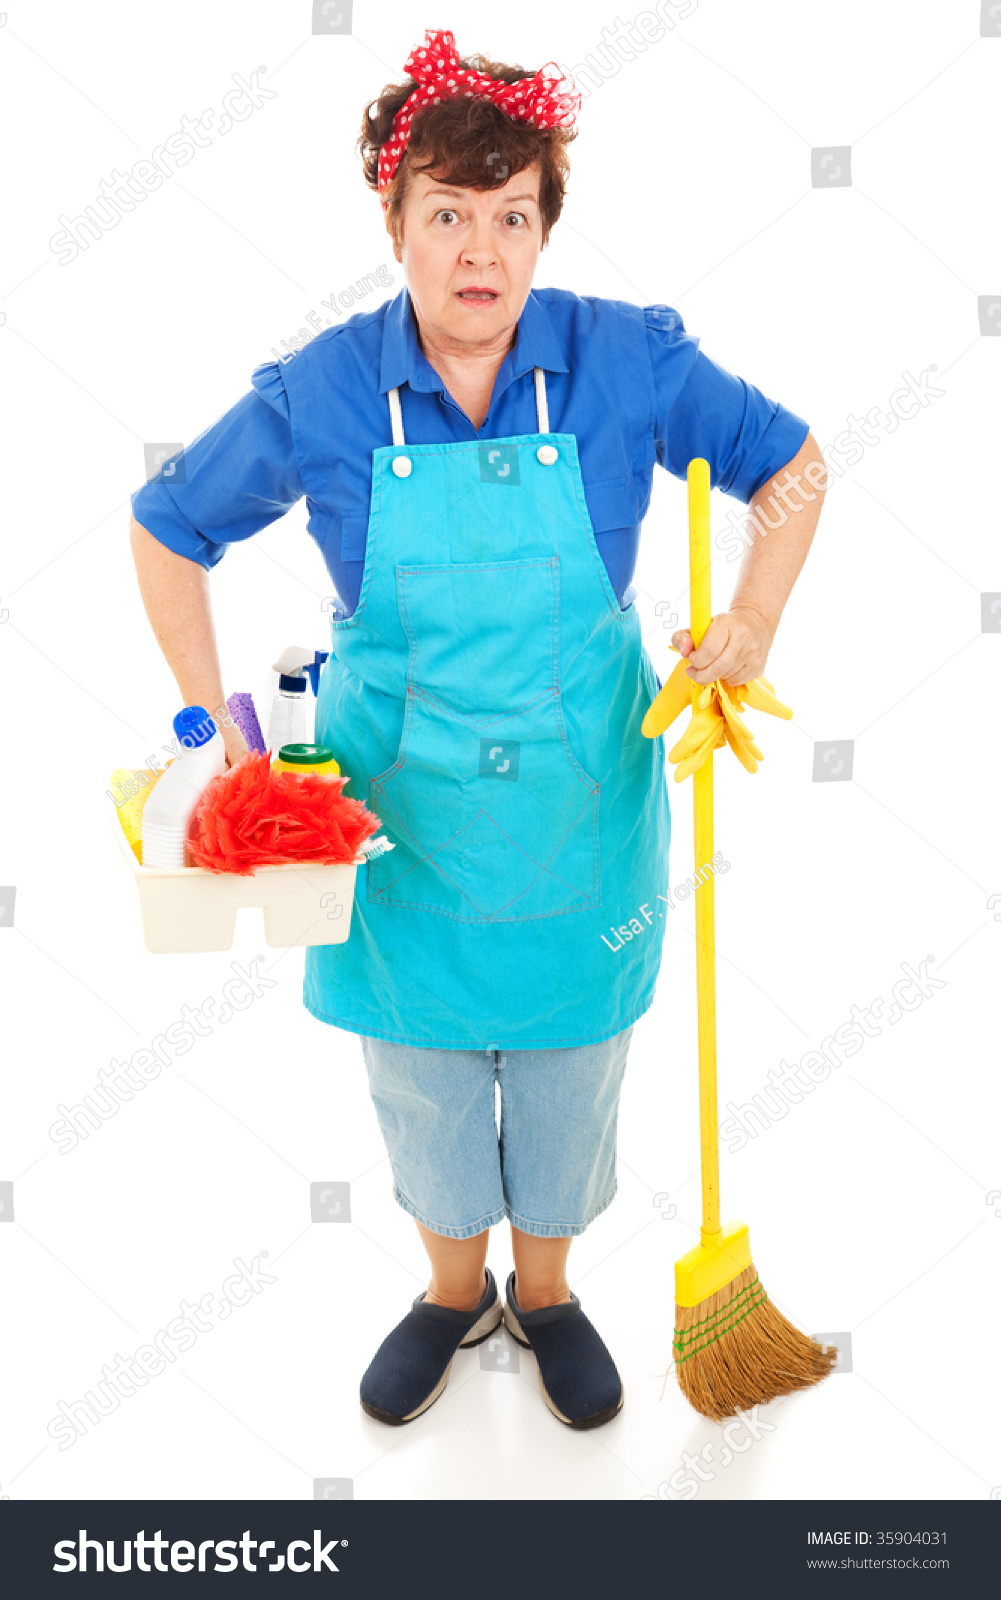 Maid Her Cleaning Equipment Wearing Very Stock Photo 35904031 ...